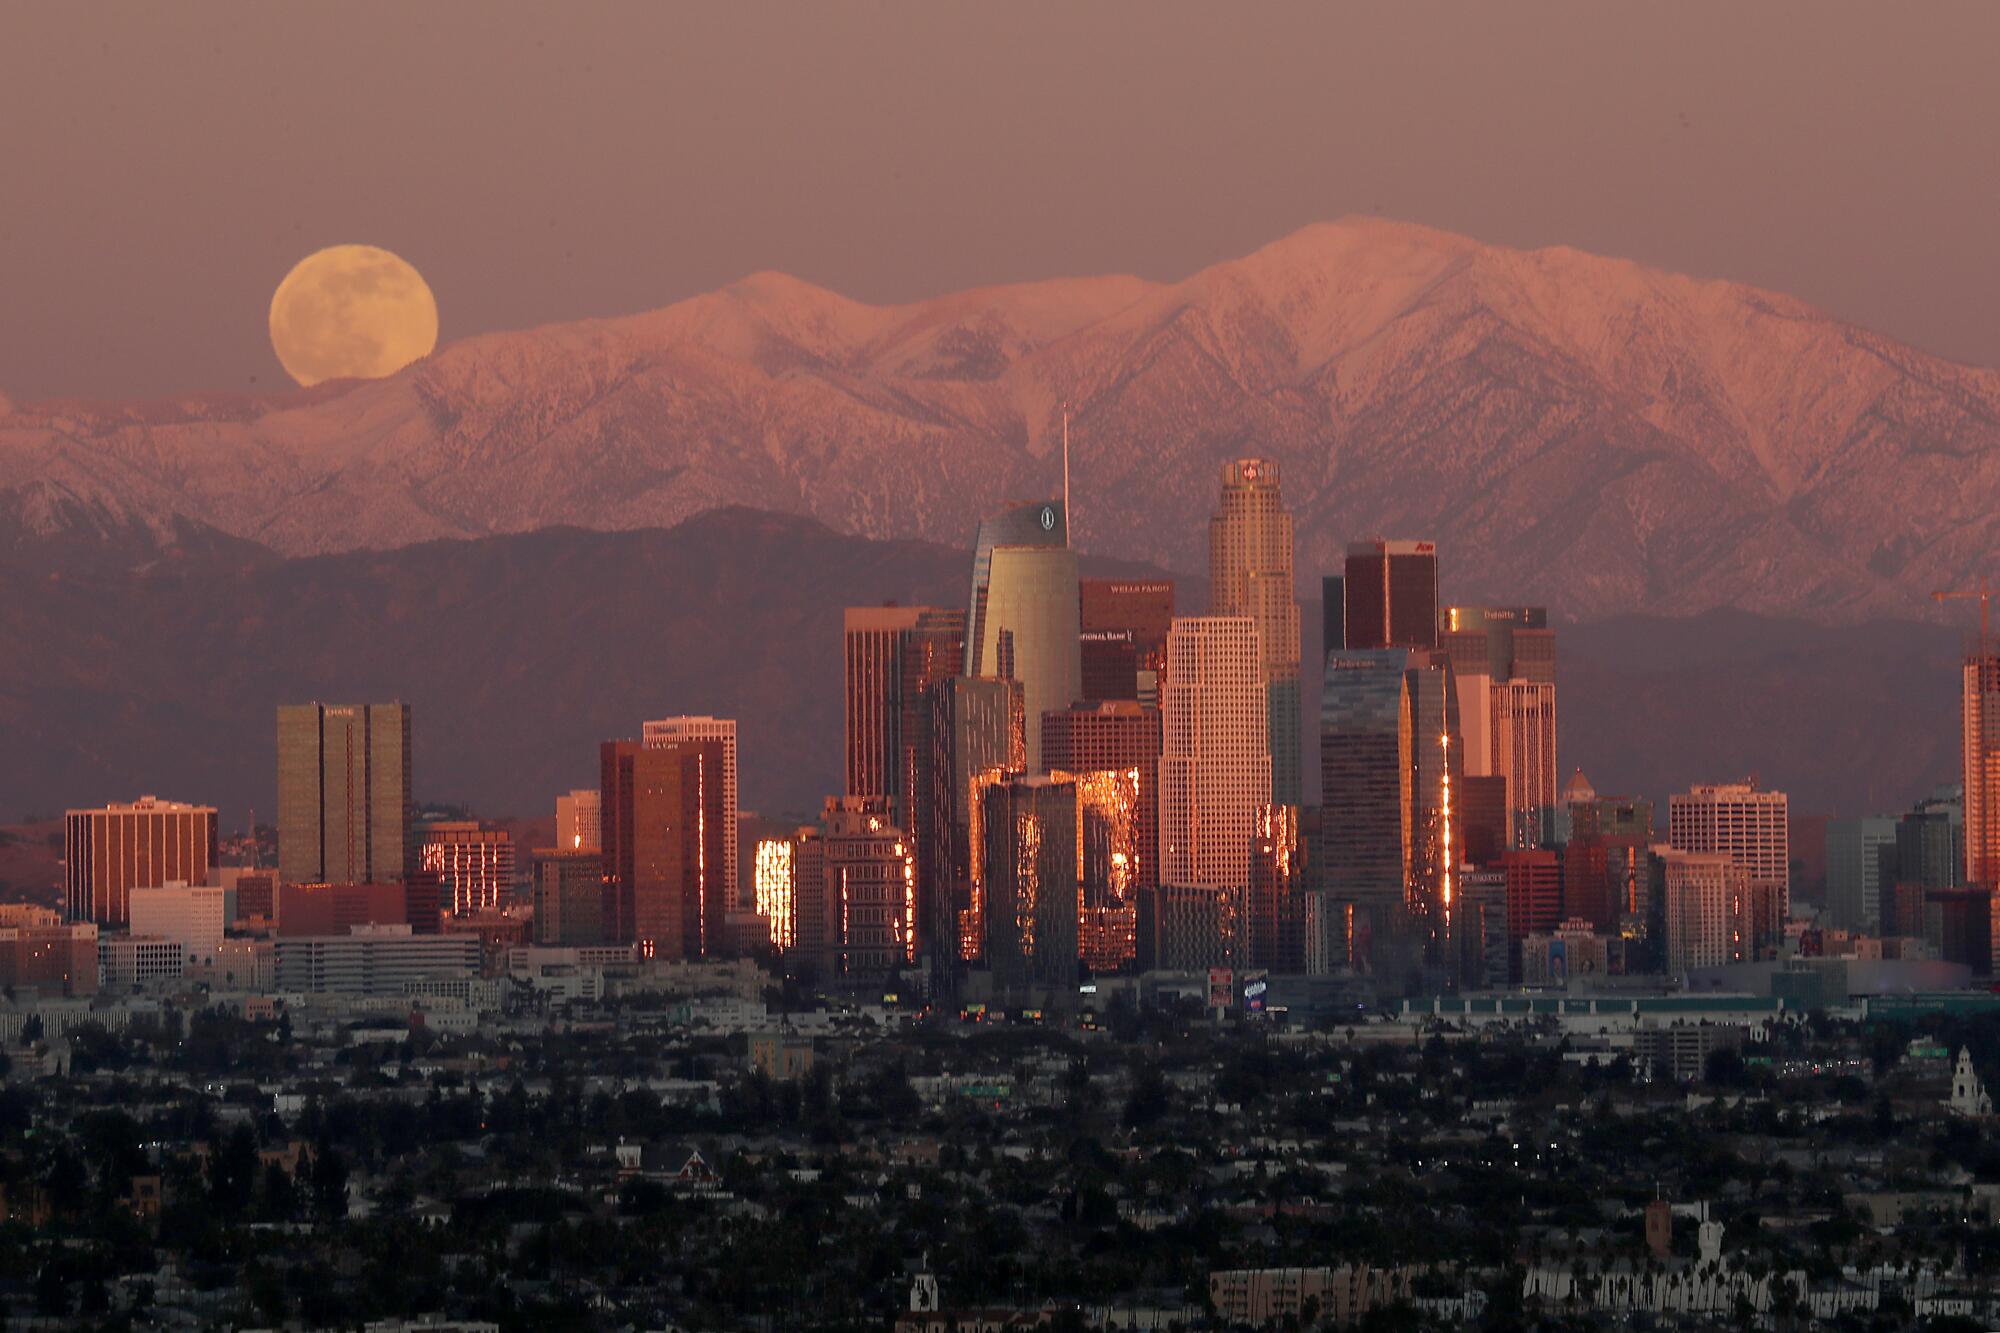 A full moon rises over the snow-capped San Gabriel Mountains and the skyline of downtown Los Angeles.